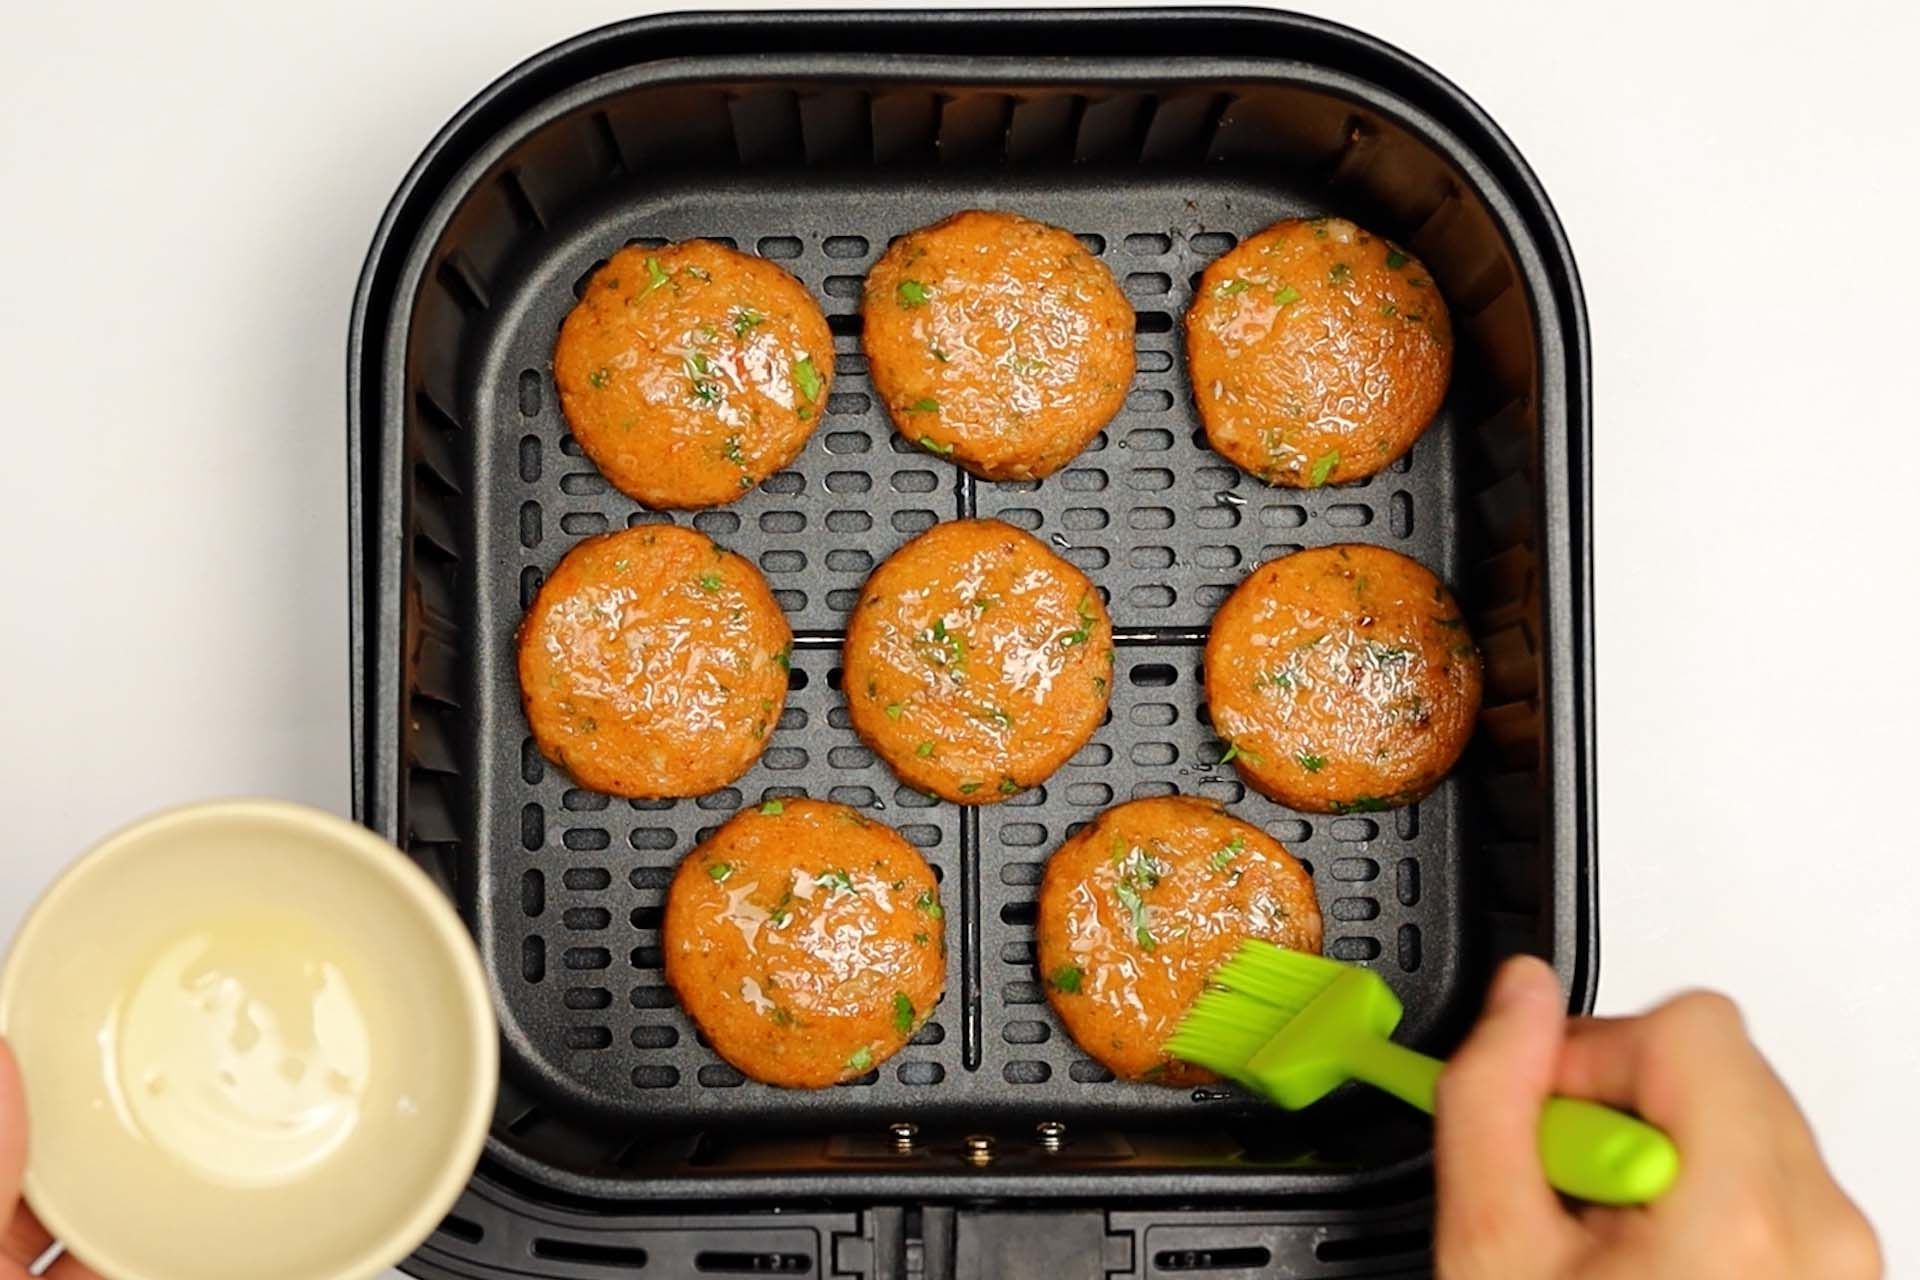 How to Make Salmon Patties in an Air Fryer step 7